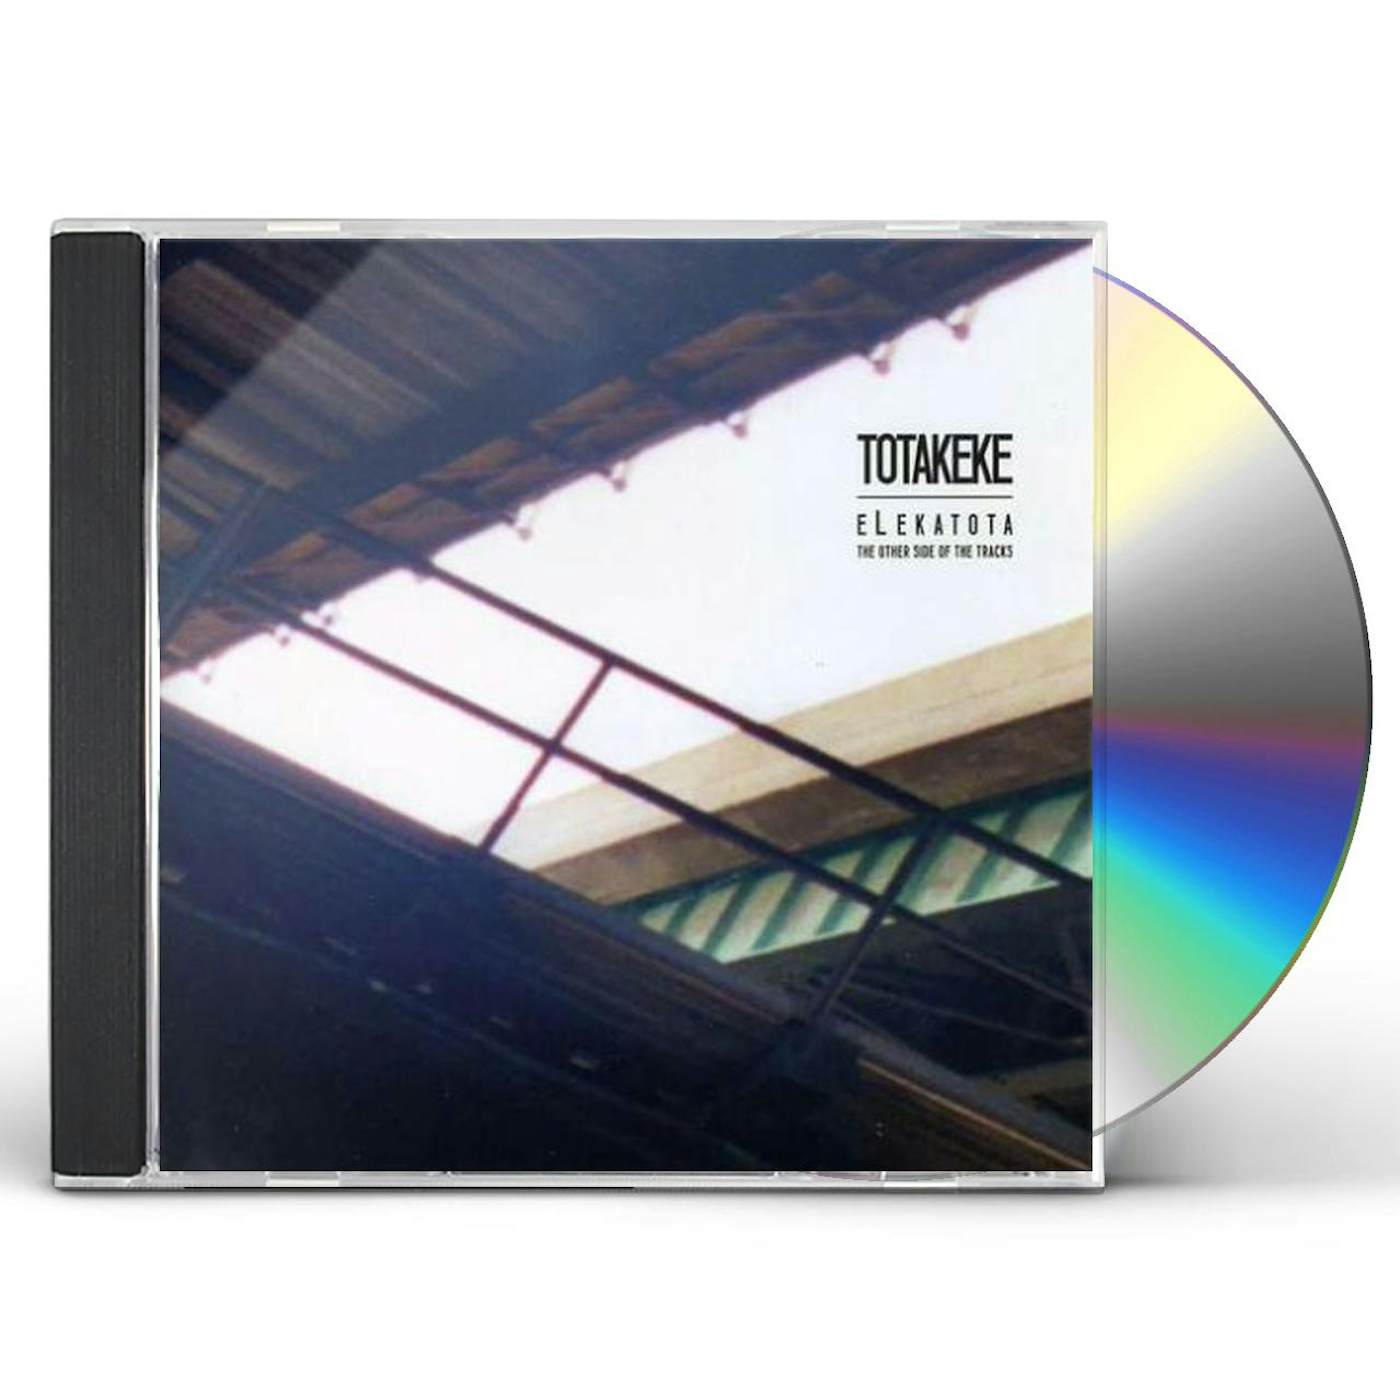 Totakeke FORGOTTEN ON THE OTHER SIDE OF THE TRACKS CD